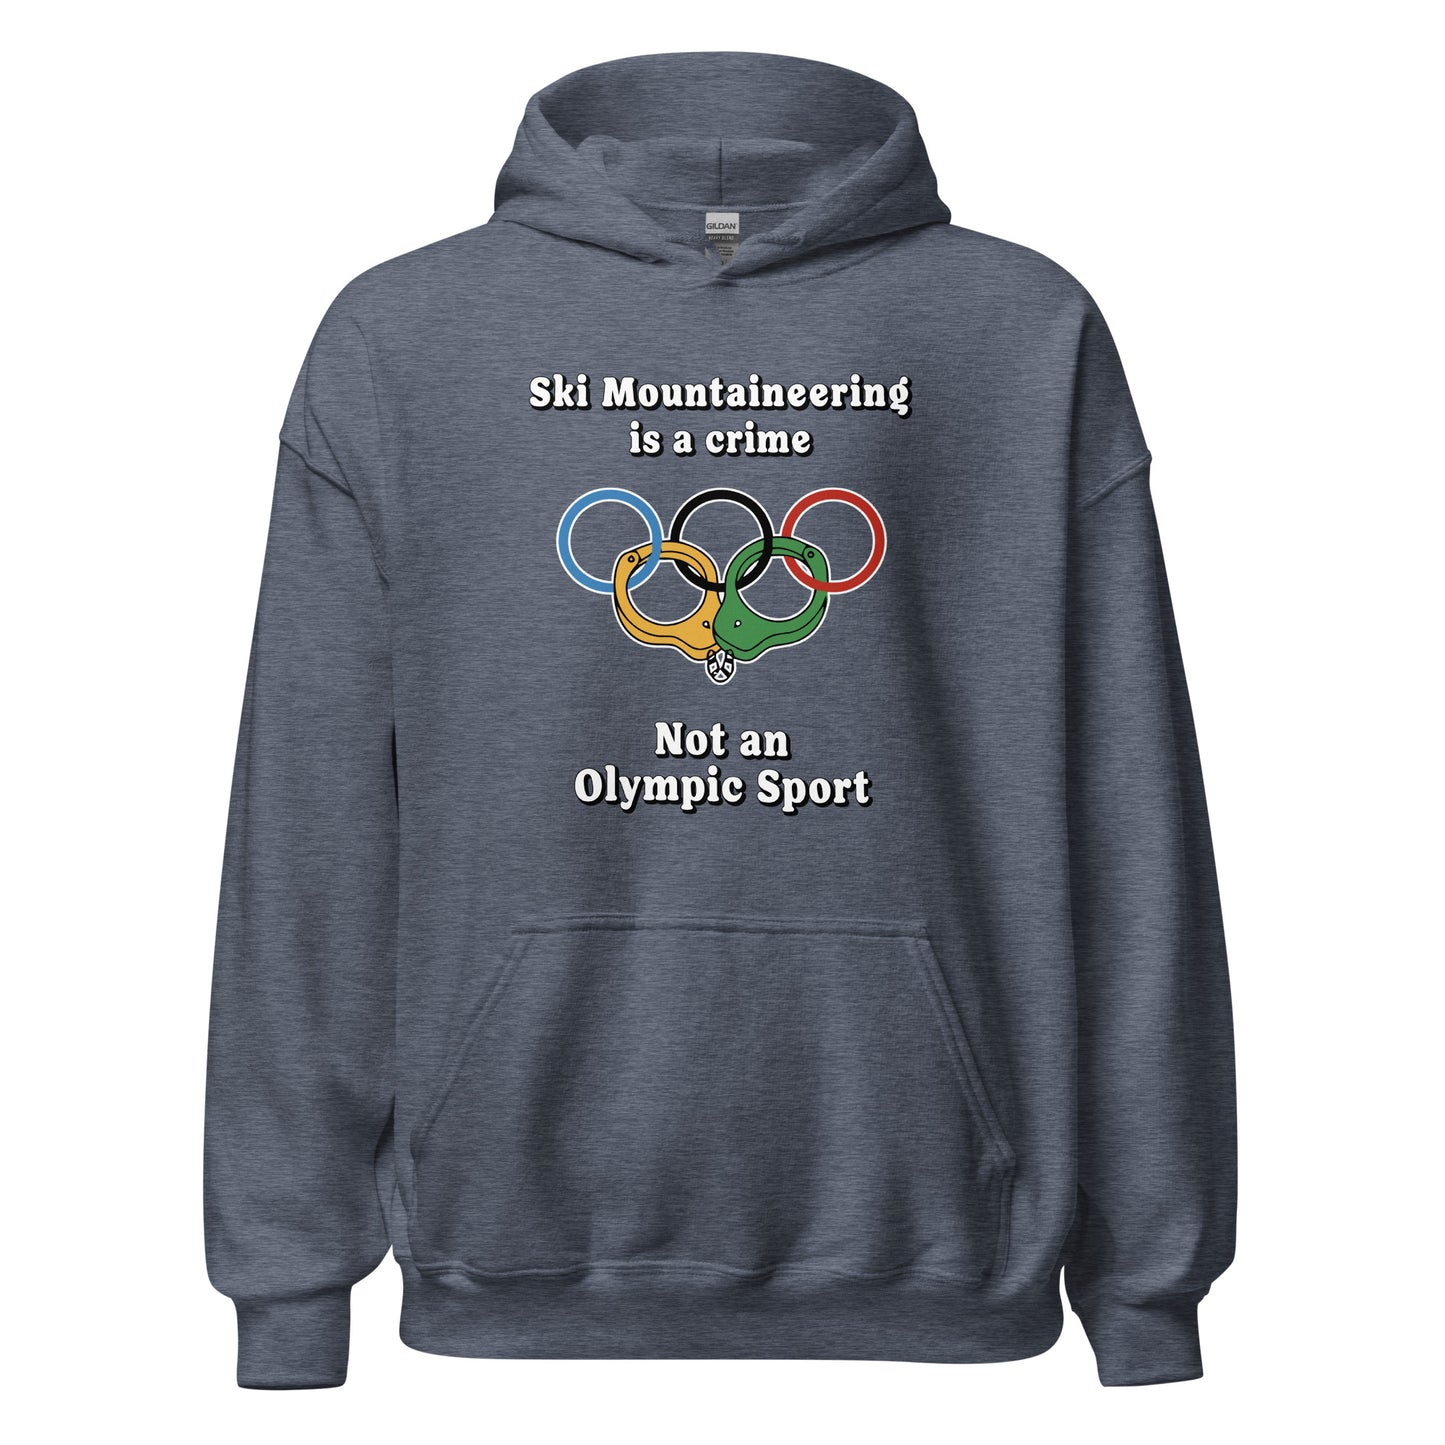 Ski Mountaineering is a crime not an olympic sport design printed on hoodie by Whistler Shirts 